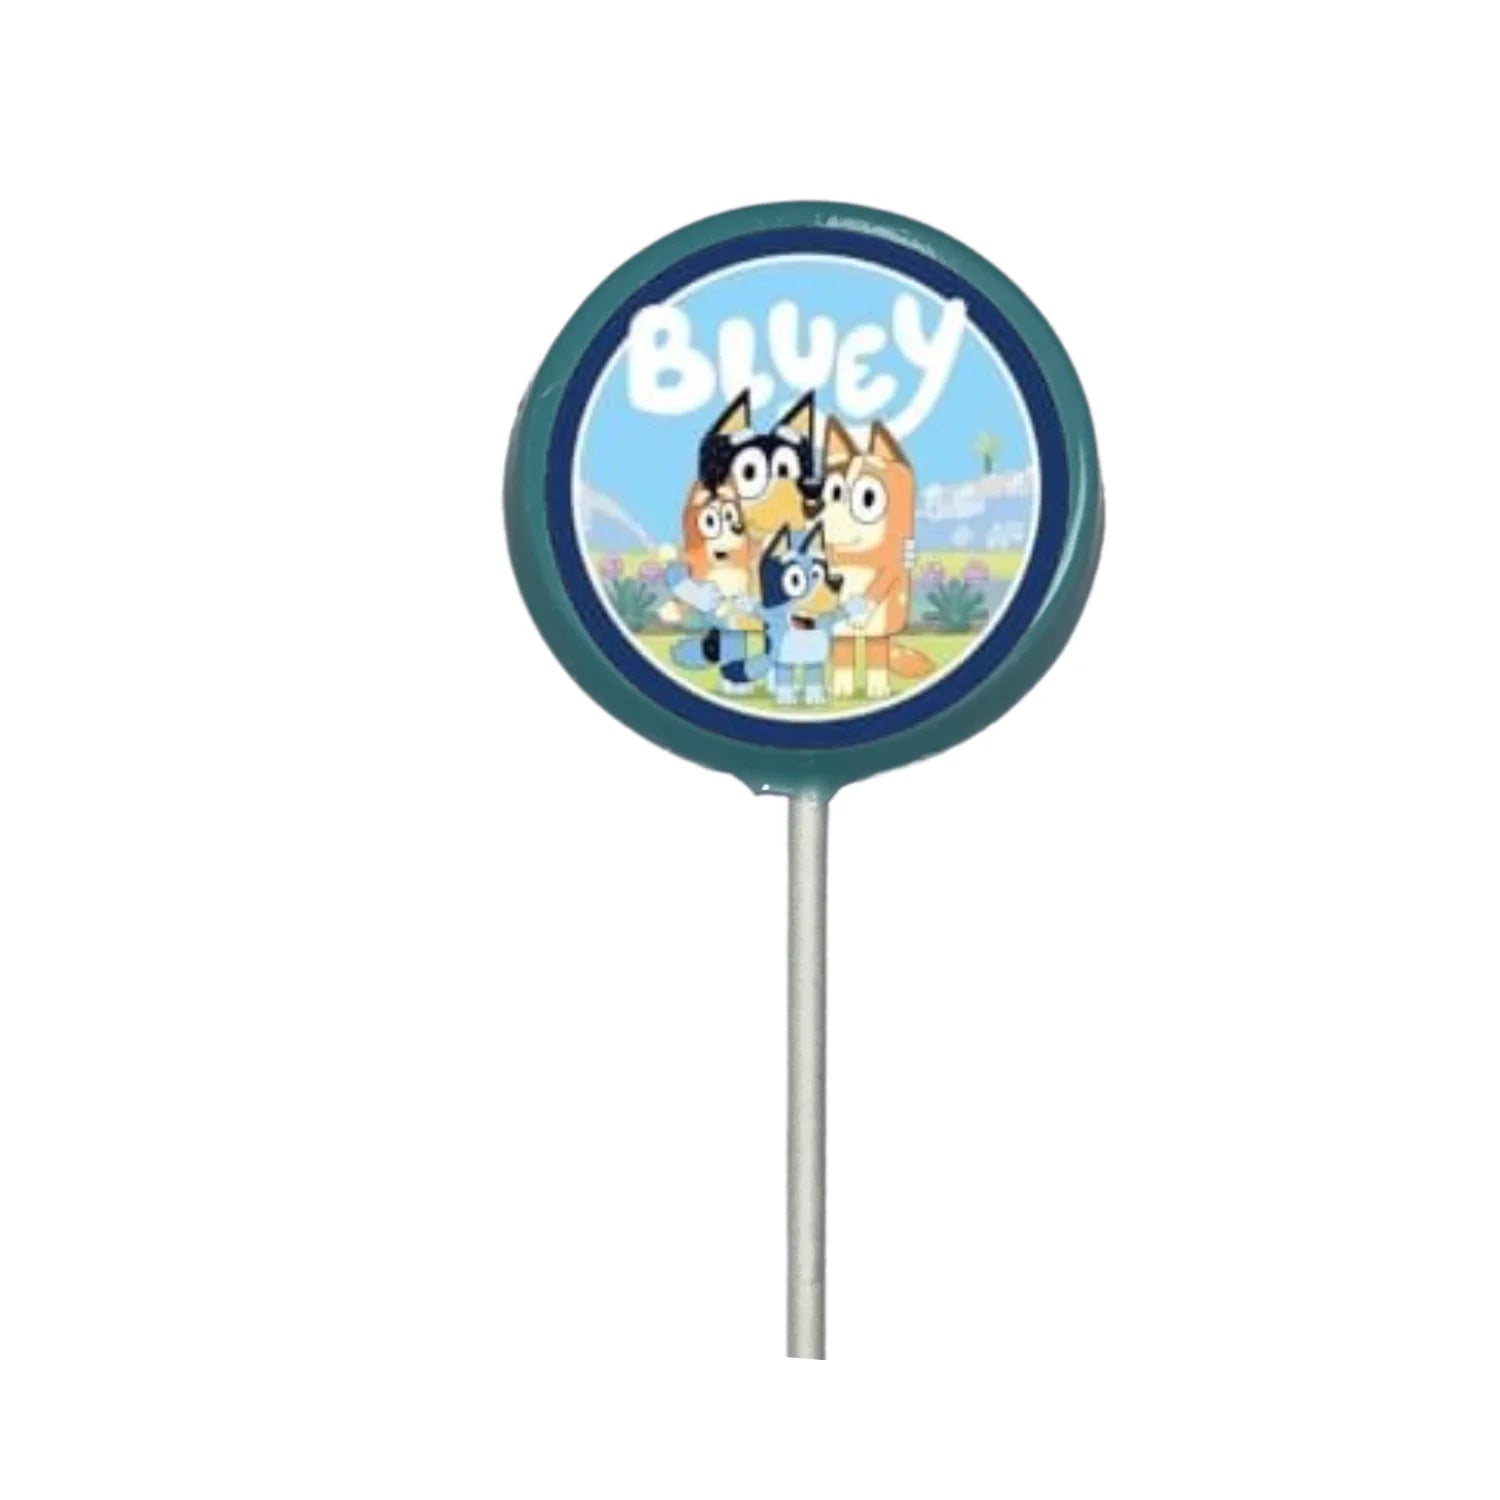 Edible Bluey Characters Images White Chocolate Lollipop Suckers .75 oz 2 inch Bluey Characters White Chocolate